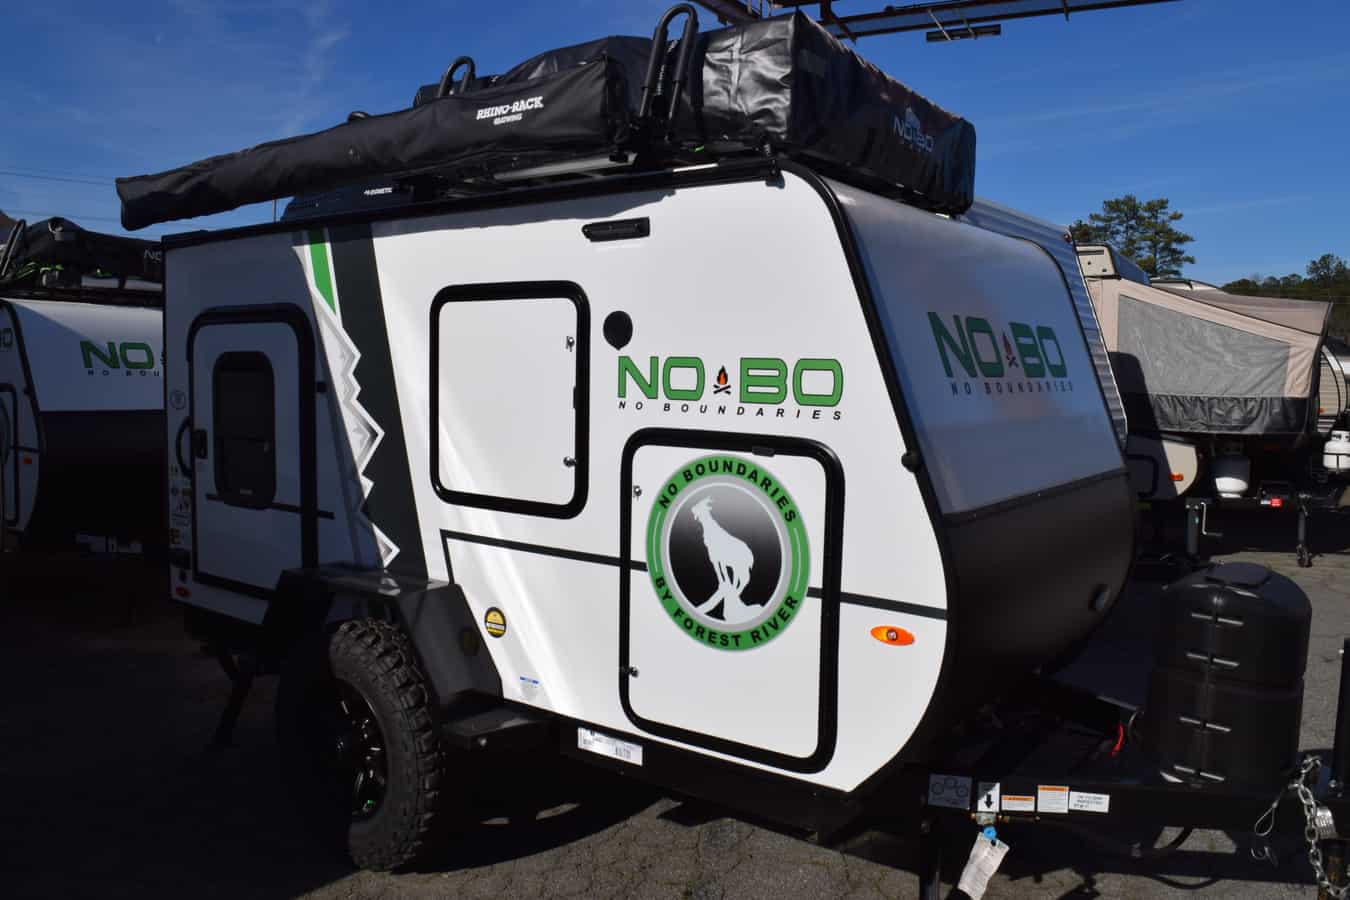 NEW 2019 Forest River NO BOUNDARIES (NOBO) 10.6